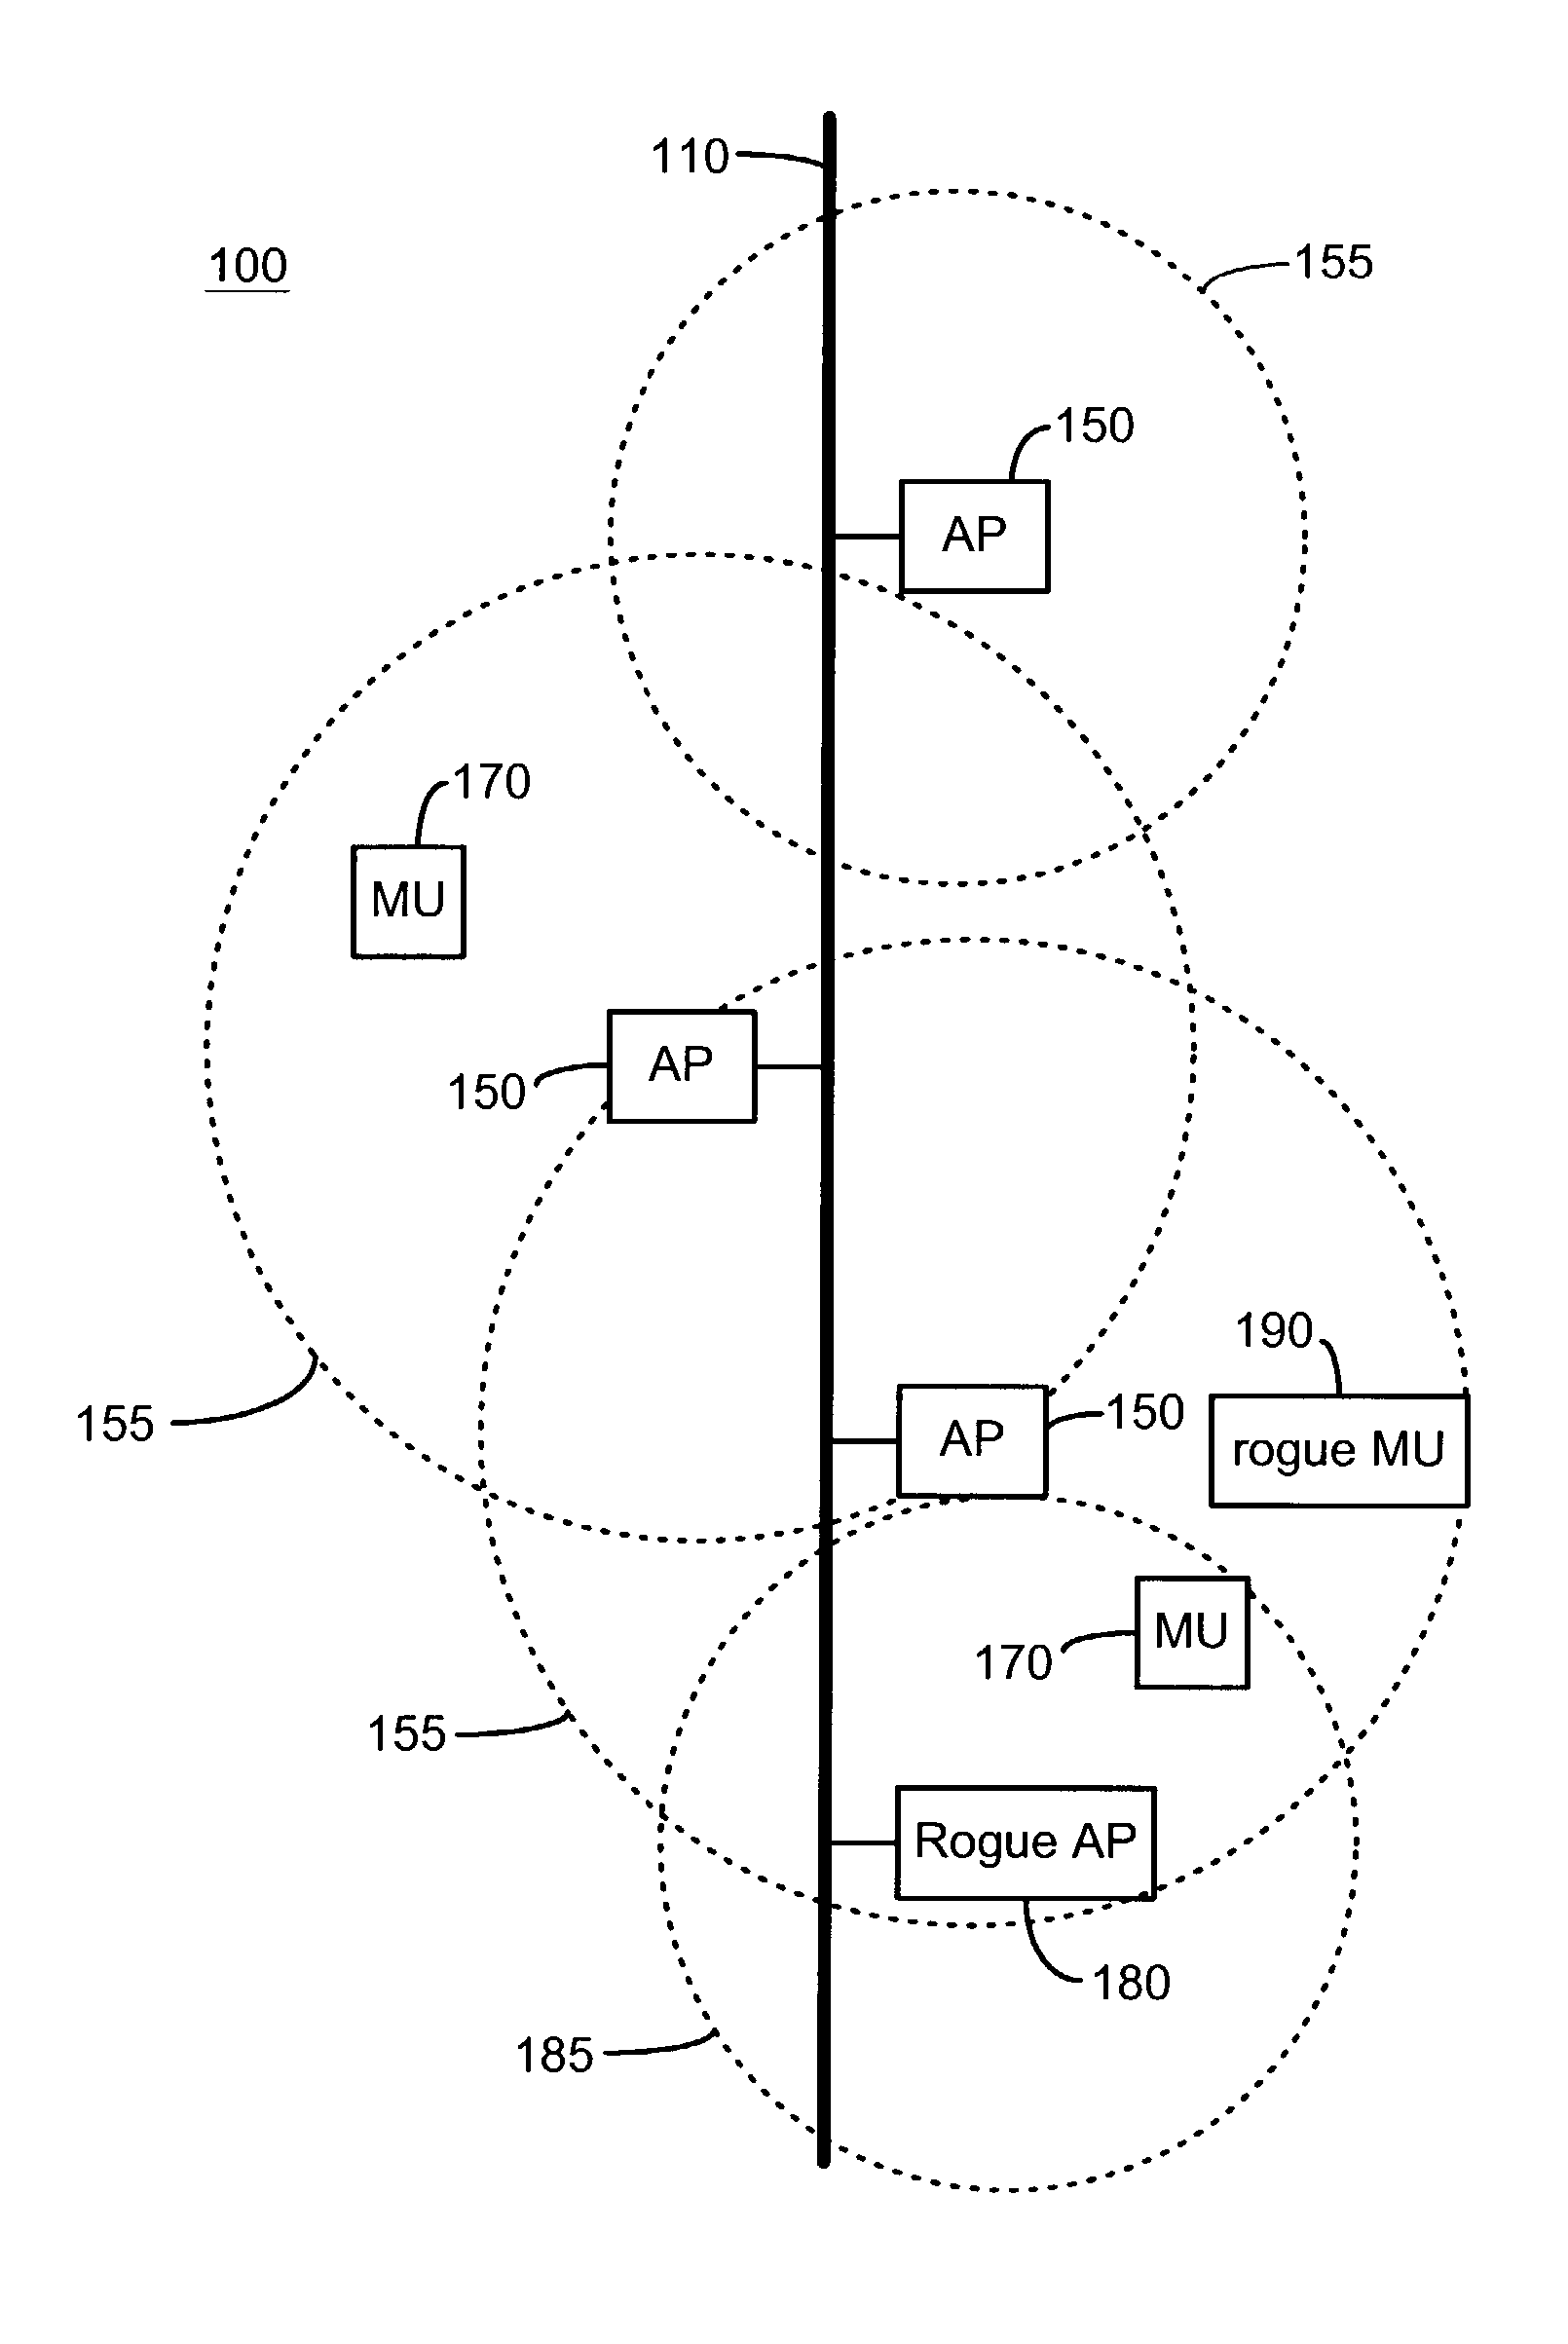 System and method for detecting unauthorized wireless access points